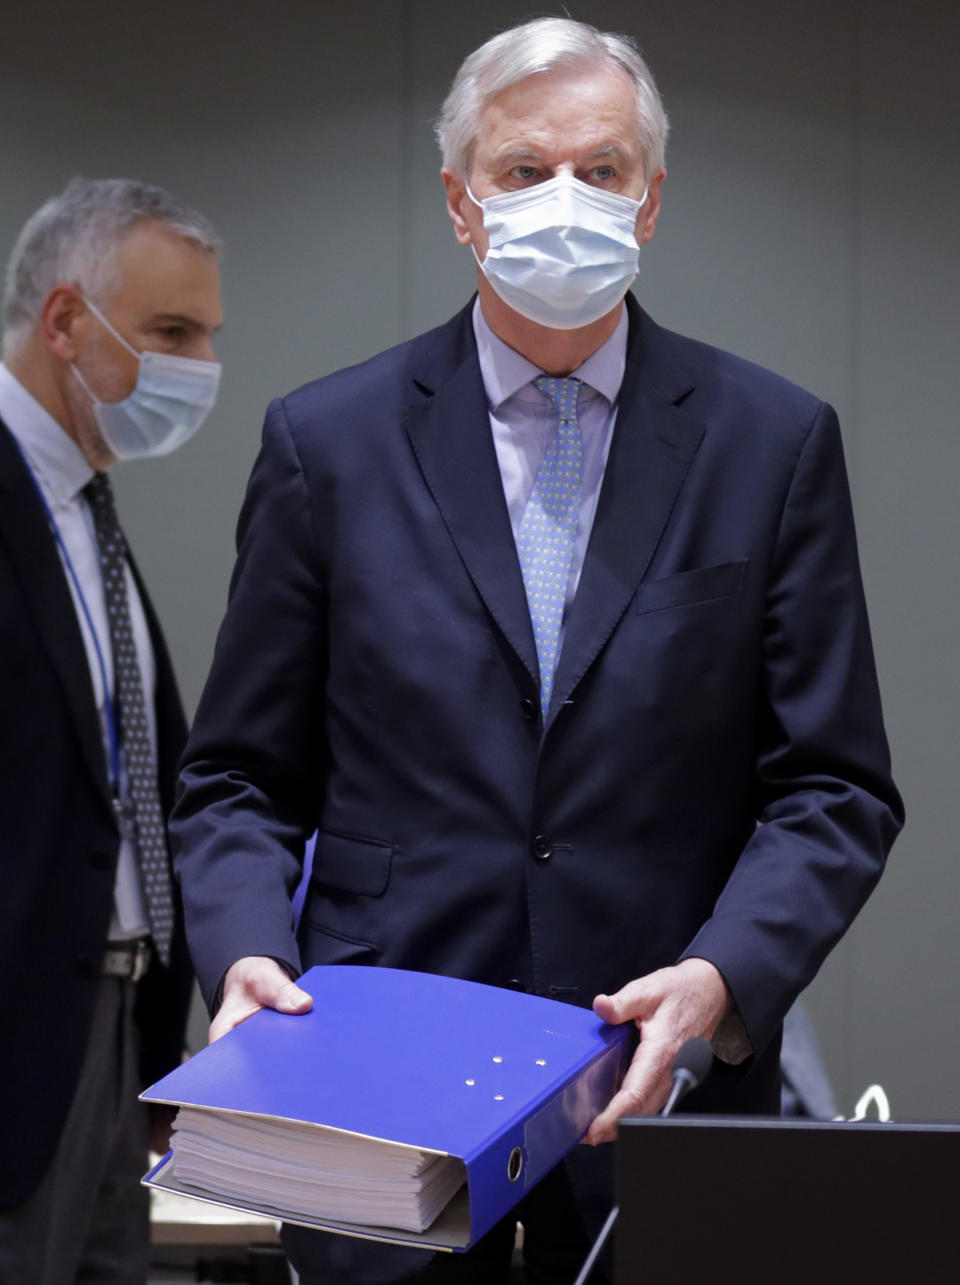 European Union chief negotiator Michel Barnier carries a binder of the Brexit trade deal during a special meeting of Coreper, at the European Council building in Brussels, Friday, Dec. 25, 2020. European Union ambassadors convened on Christmas Day to start an assessment of the massive free-trade deal the EU struck with Britain. After the deal was announced on Thursday, EU nations already showed support for the outcome and it was expected that they would unanimously back the agreement, a prerequisite for its legal approval. (Olivier Hoslet, Pool via AP)